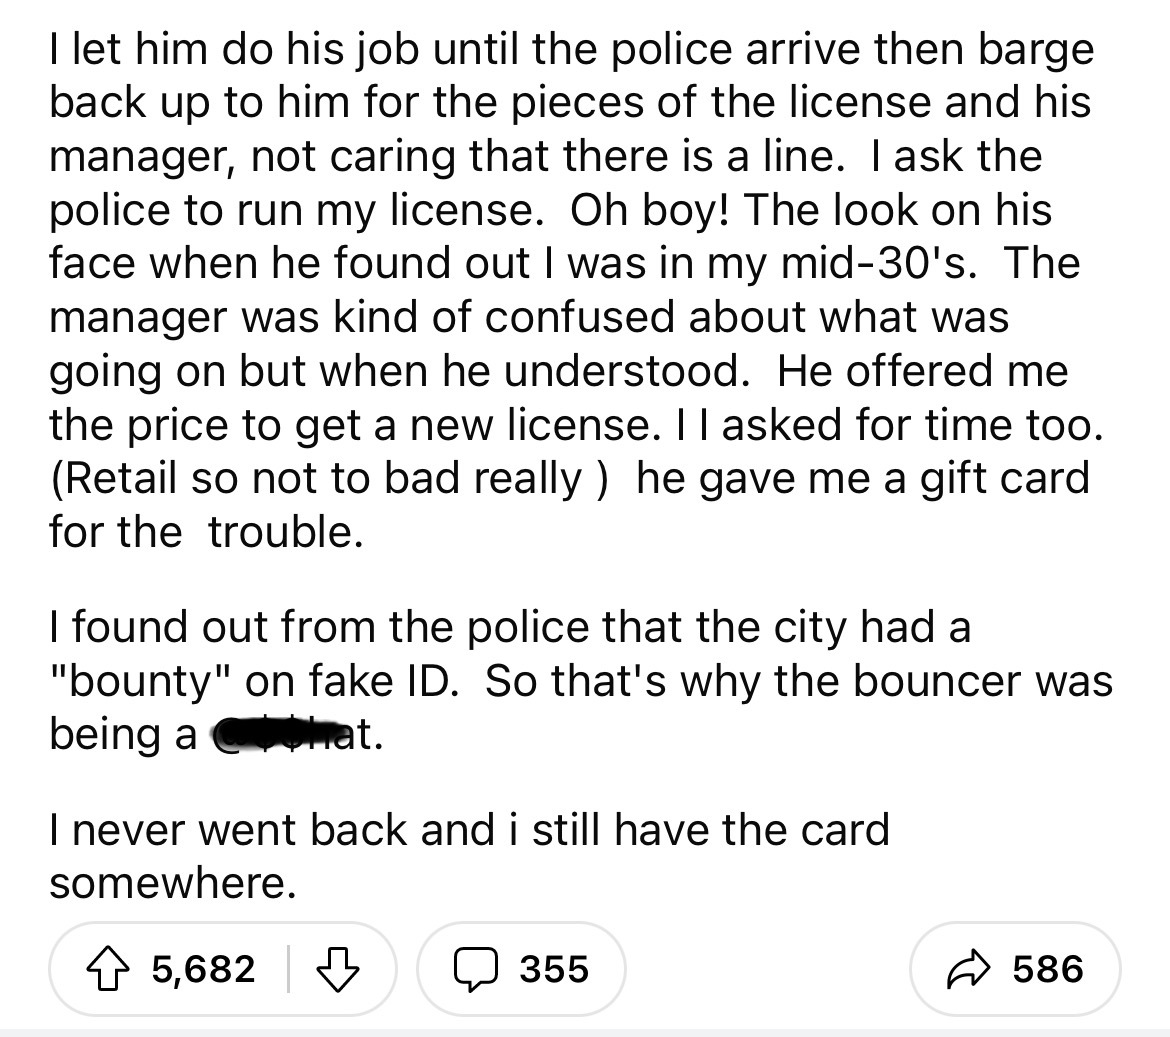 angle - I let him do his job until the police arrive then barge back up to him for the pieces of the license and his manager, not caring that there is a line. I ask the police to run my license. Oh boy! The look on his face when he found out I was in my m